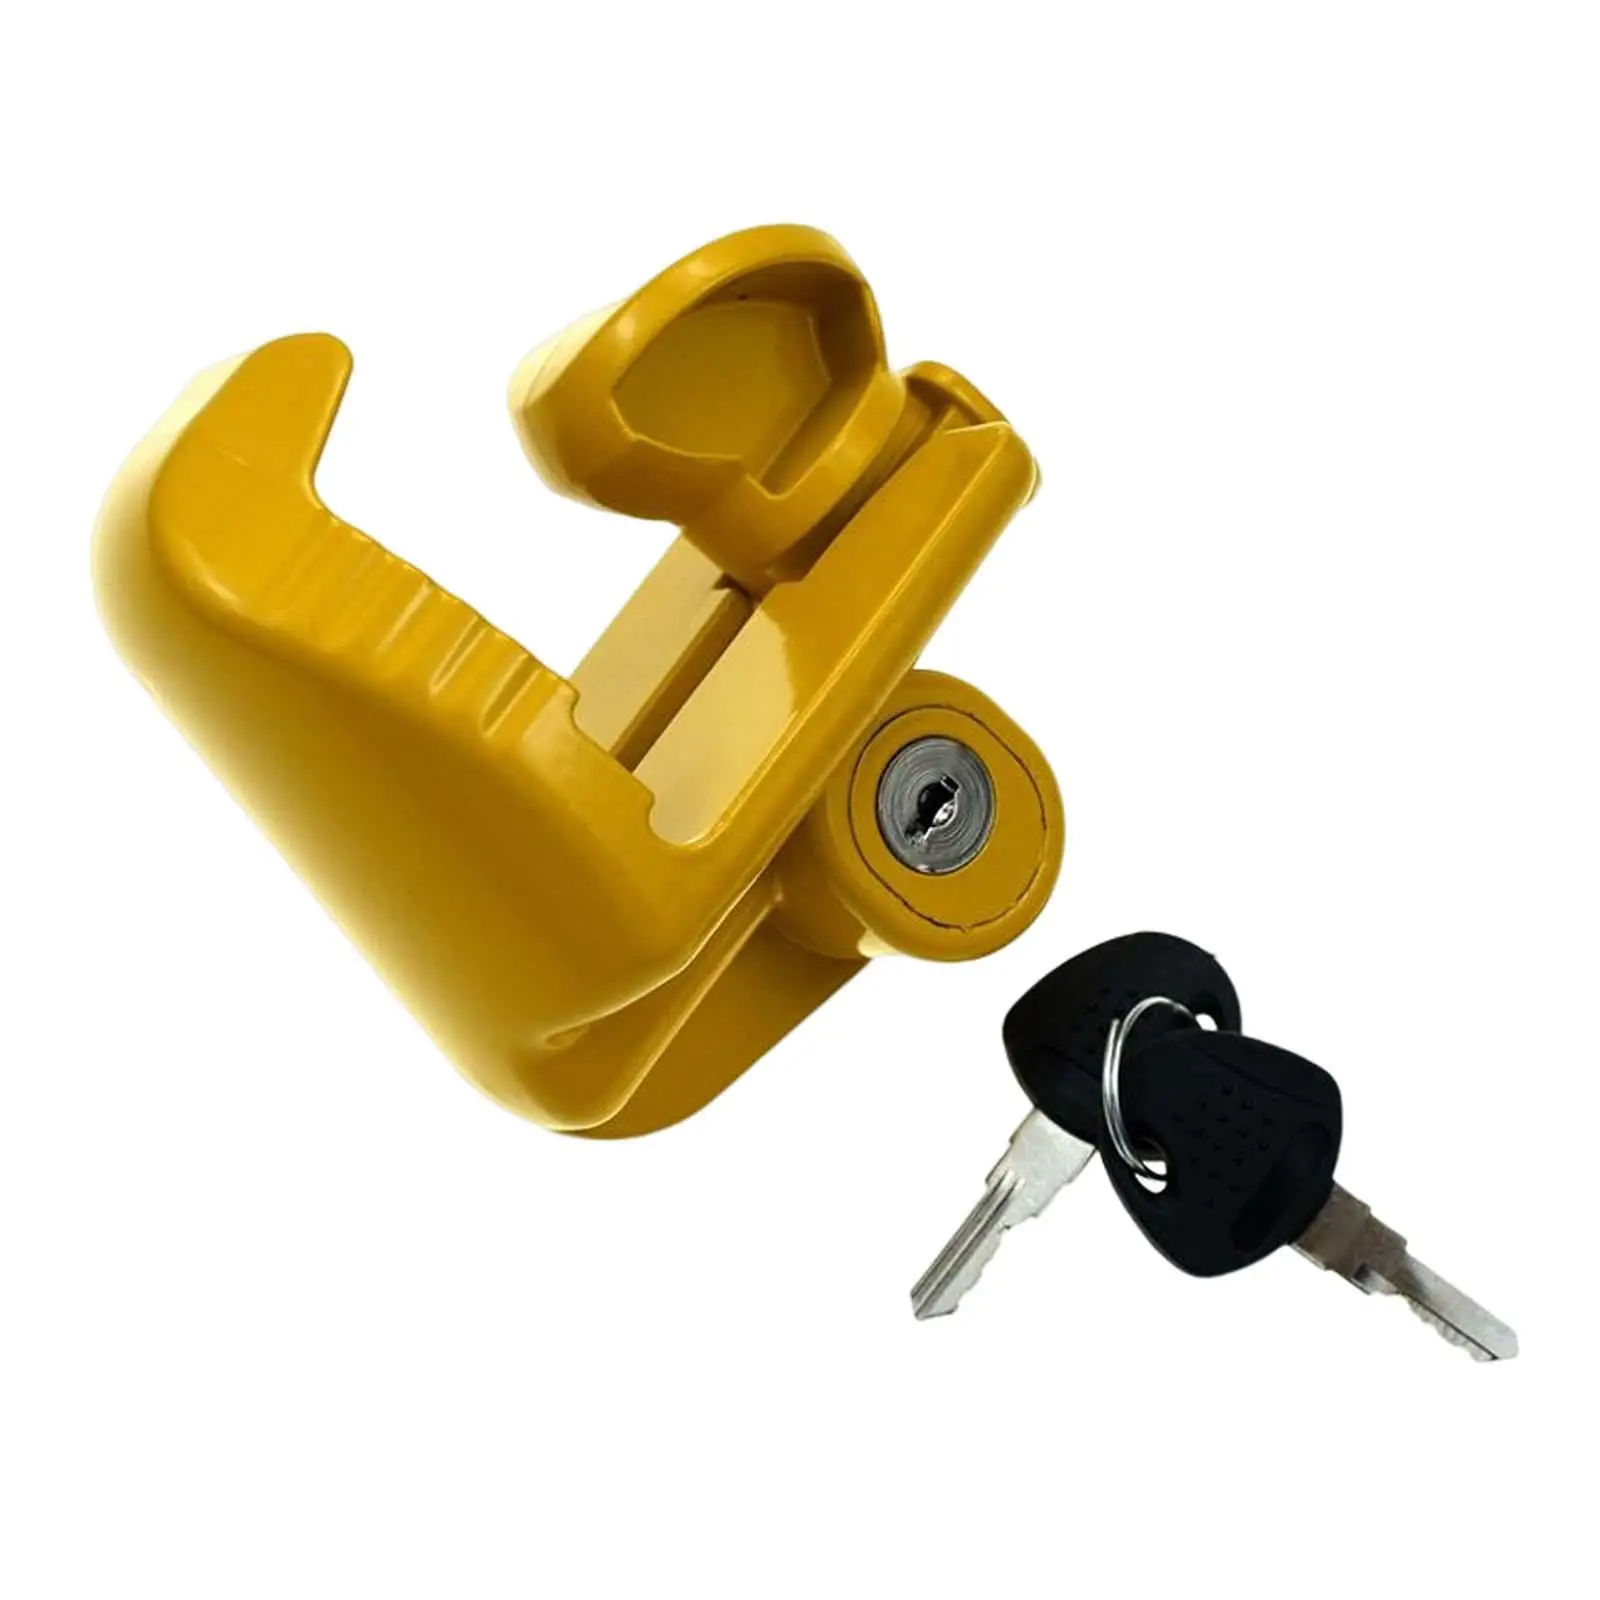 Coupler Lock Universal Accessories Spare Parts Durable Trailer Ball Coupler Adjustable Portable Professional Yellow